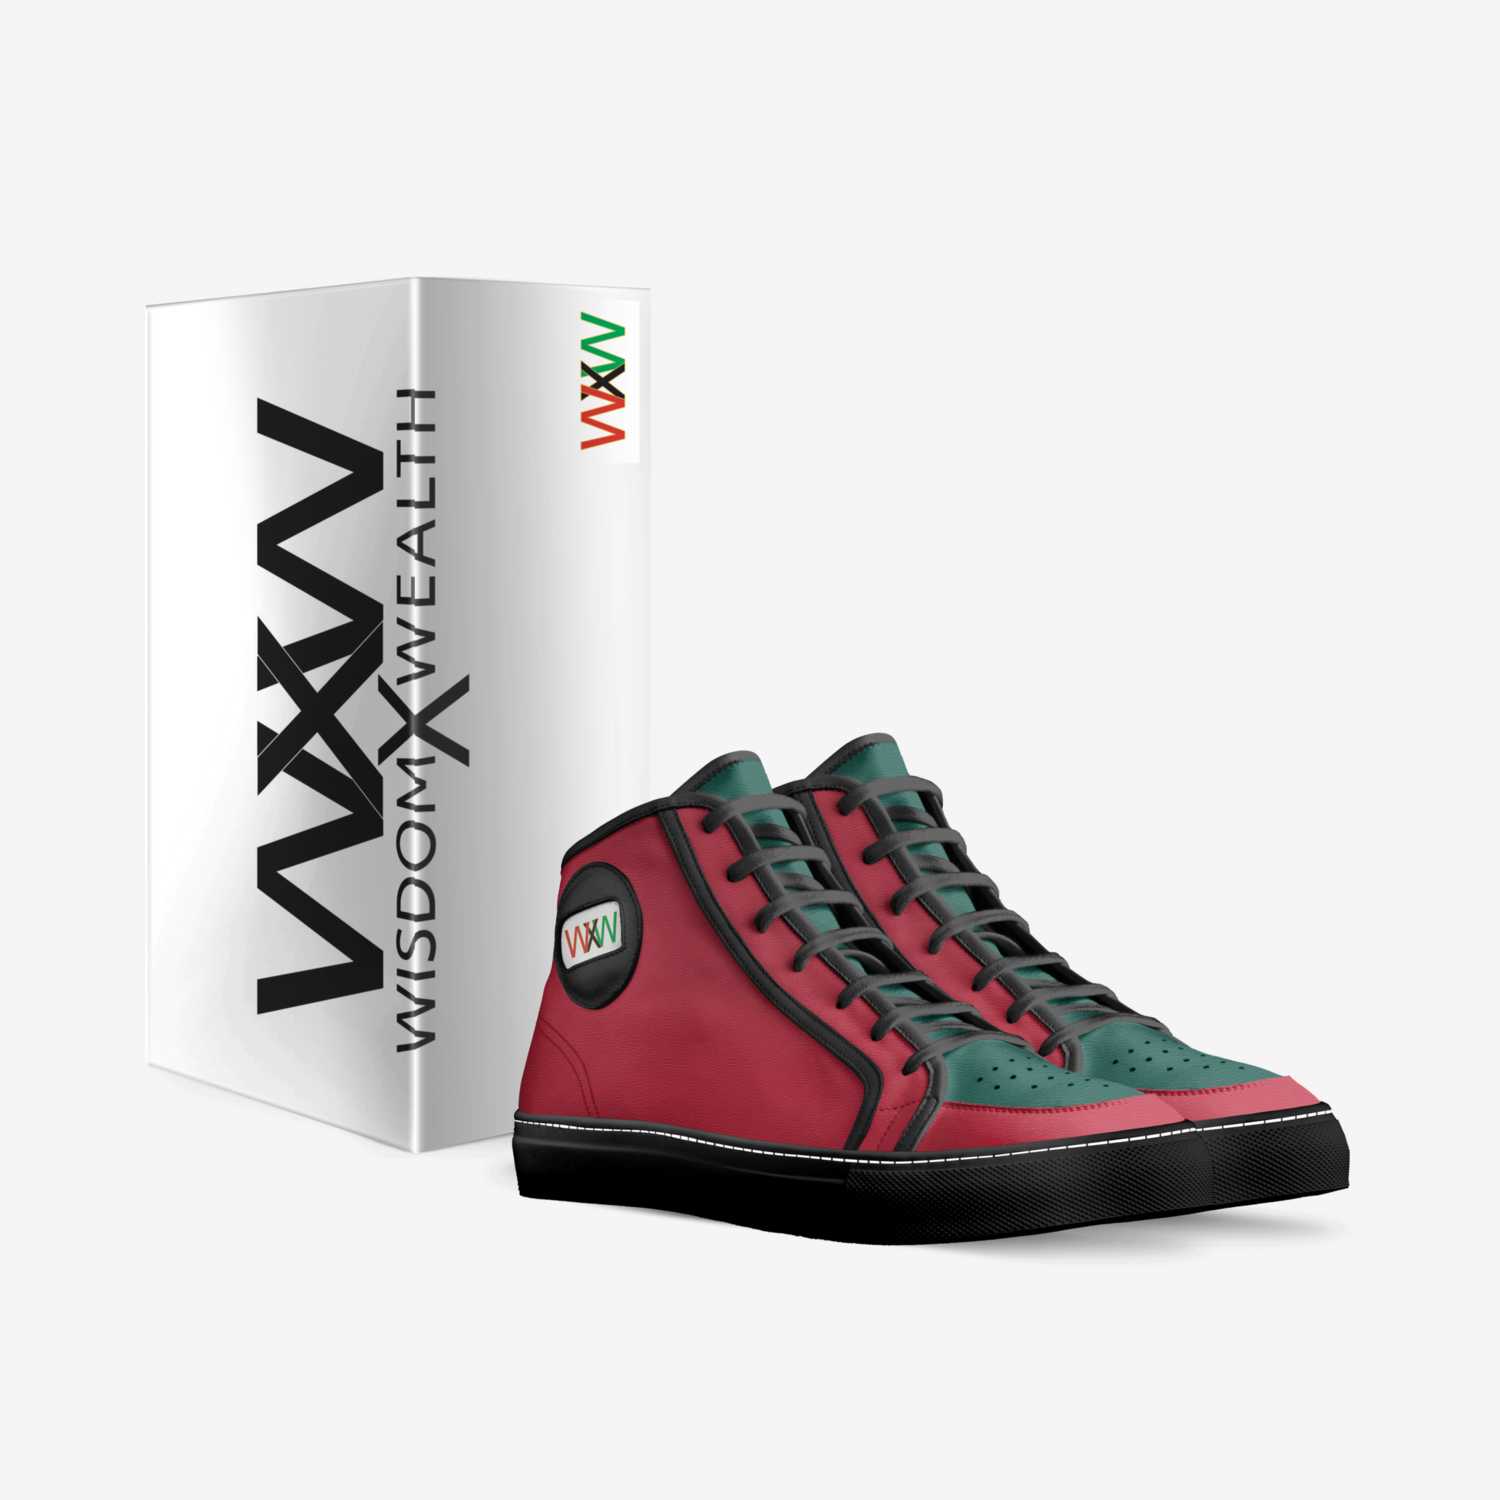 WXW custom made in Italy shoes by Mina Wilson | Box view